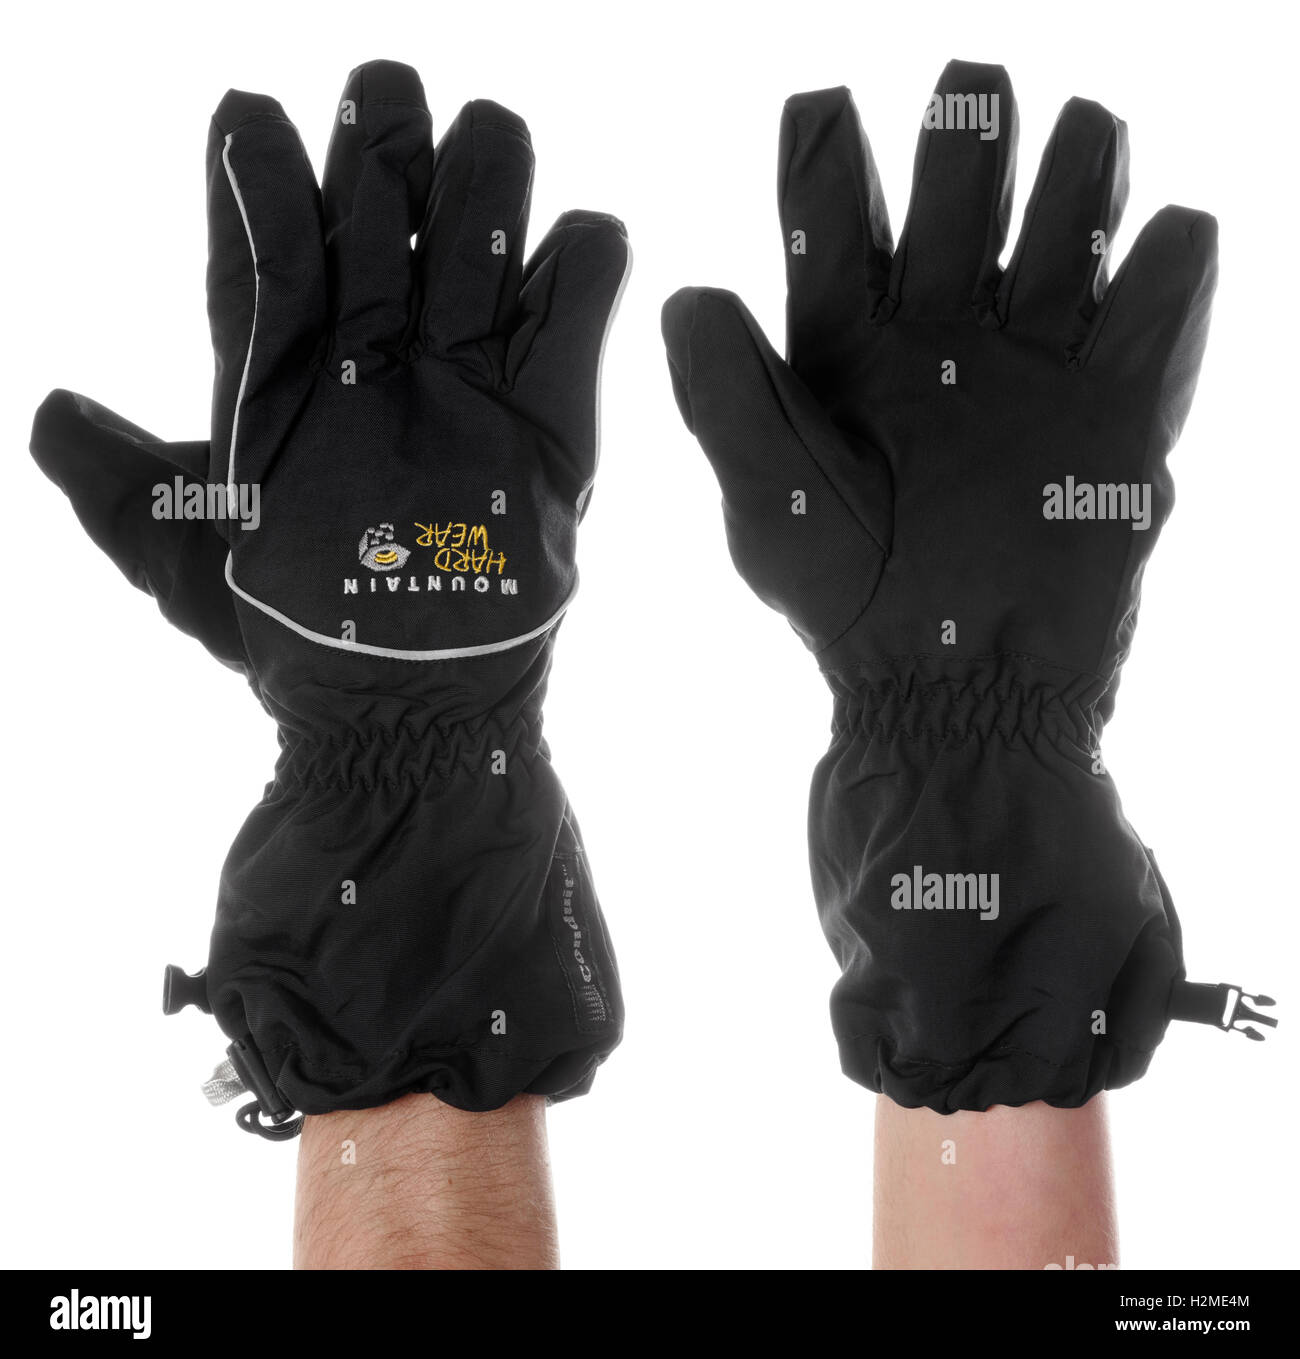 Thermal mountaineering glove on white background Stock Photo